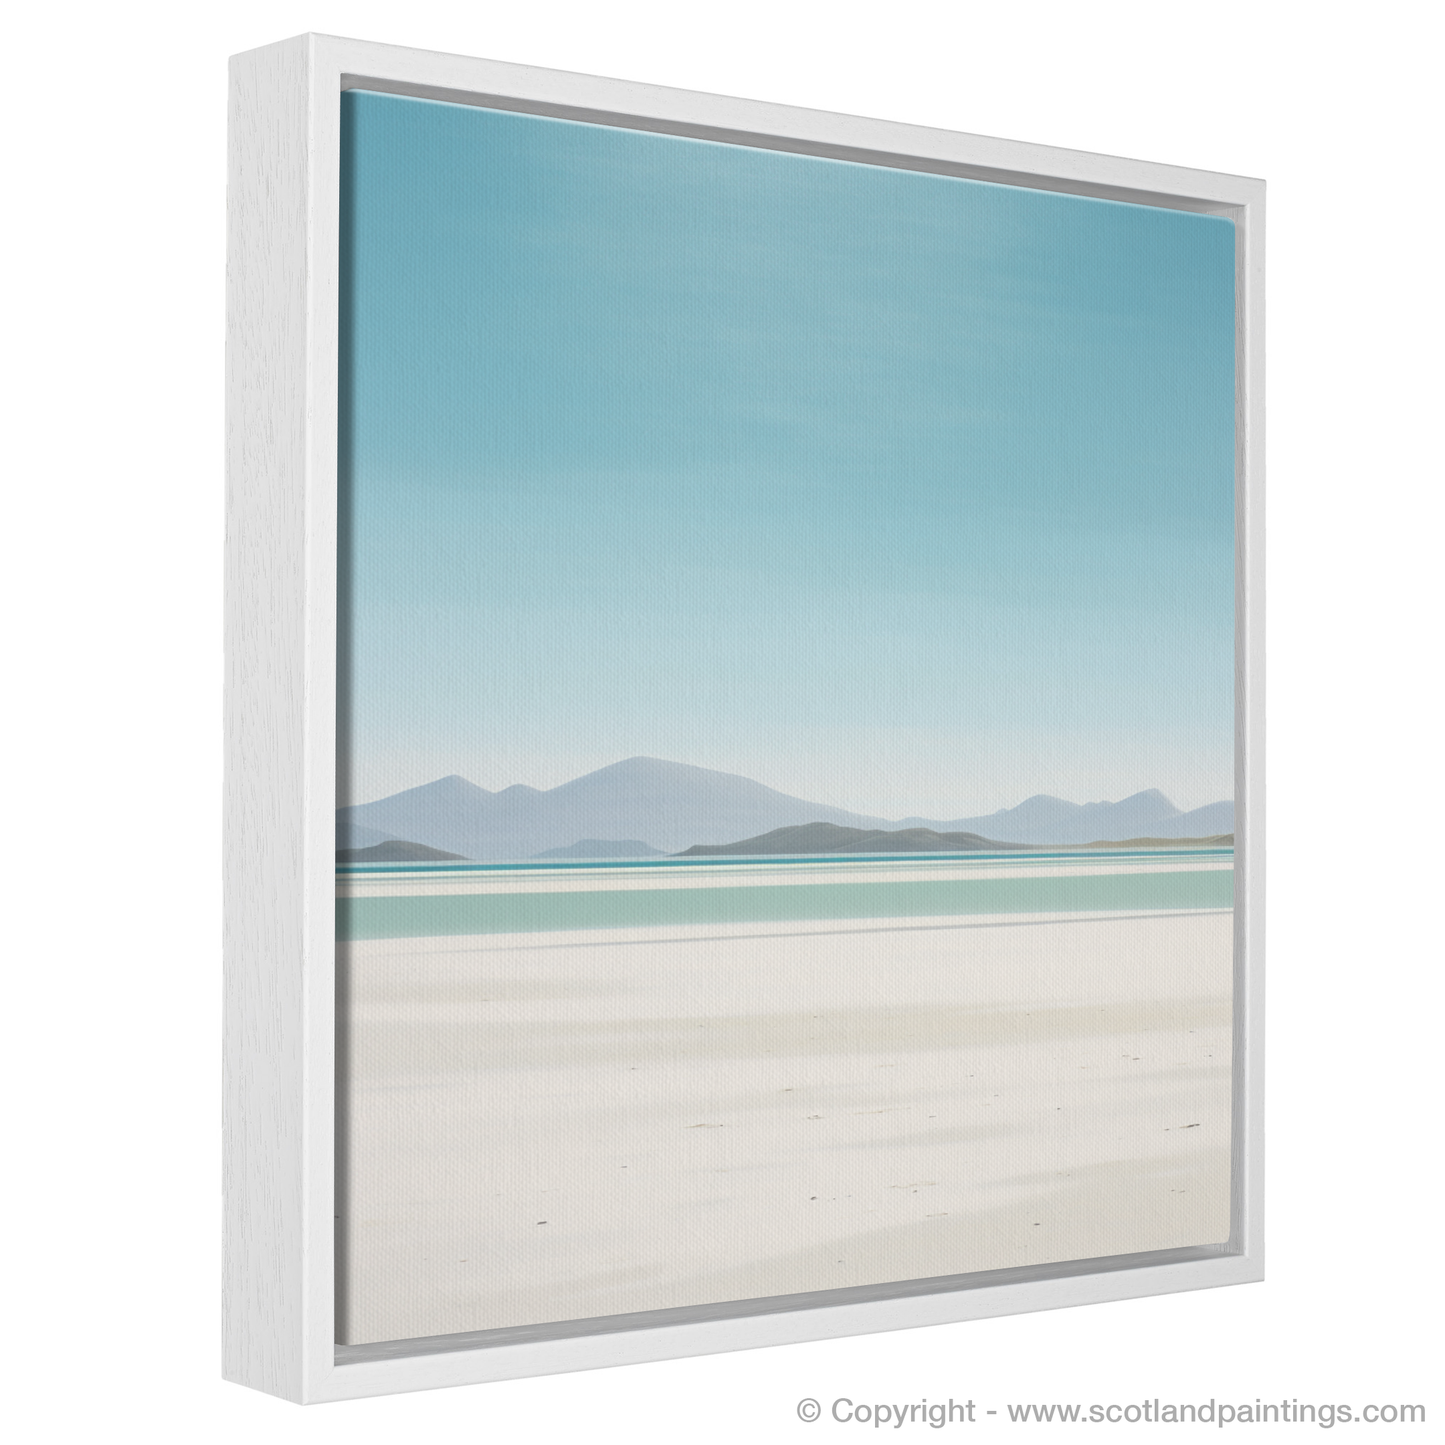 Painting and Art Print of Luskentyre Beach, Isle of Harris entitled "Serene Sands of Luskentyre: A Minimalist Ode to Scottish Shores".